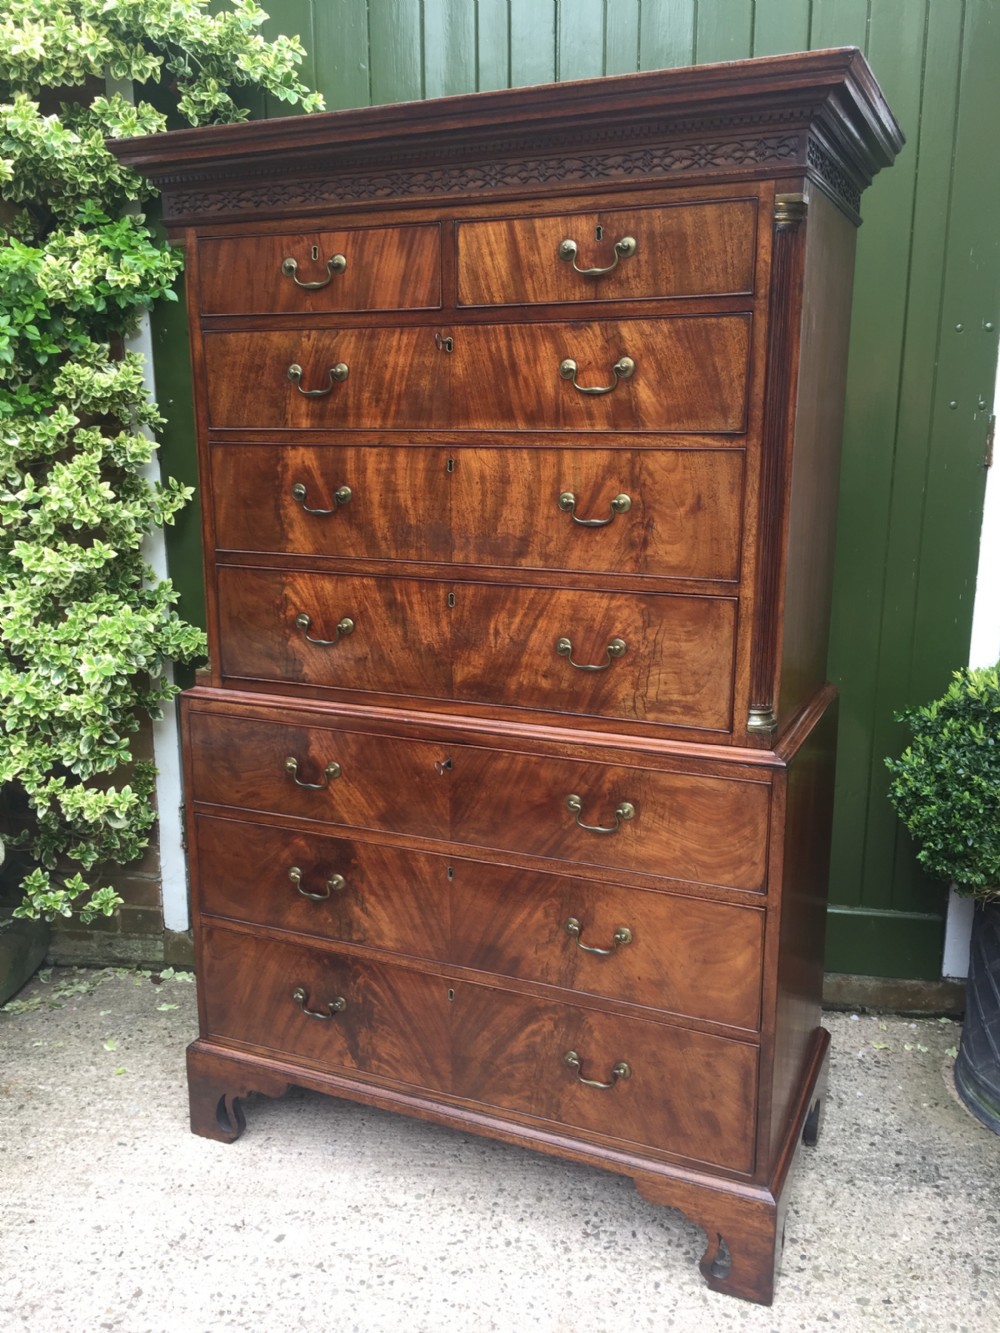 c18th george iii chippendale period mahogany chestonchest or tallboy of excellent quality